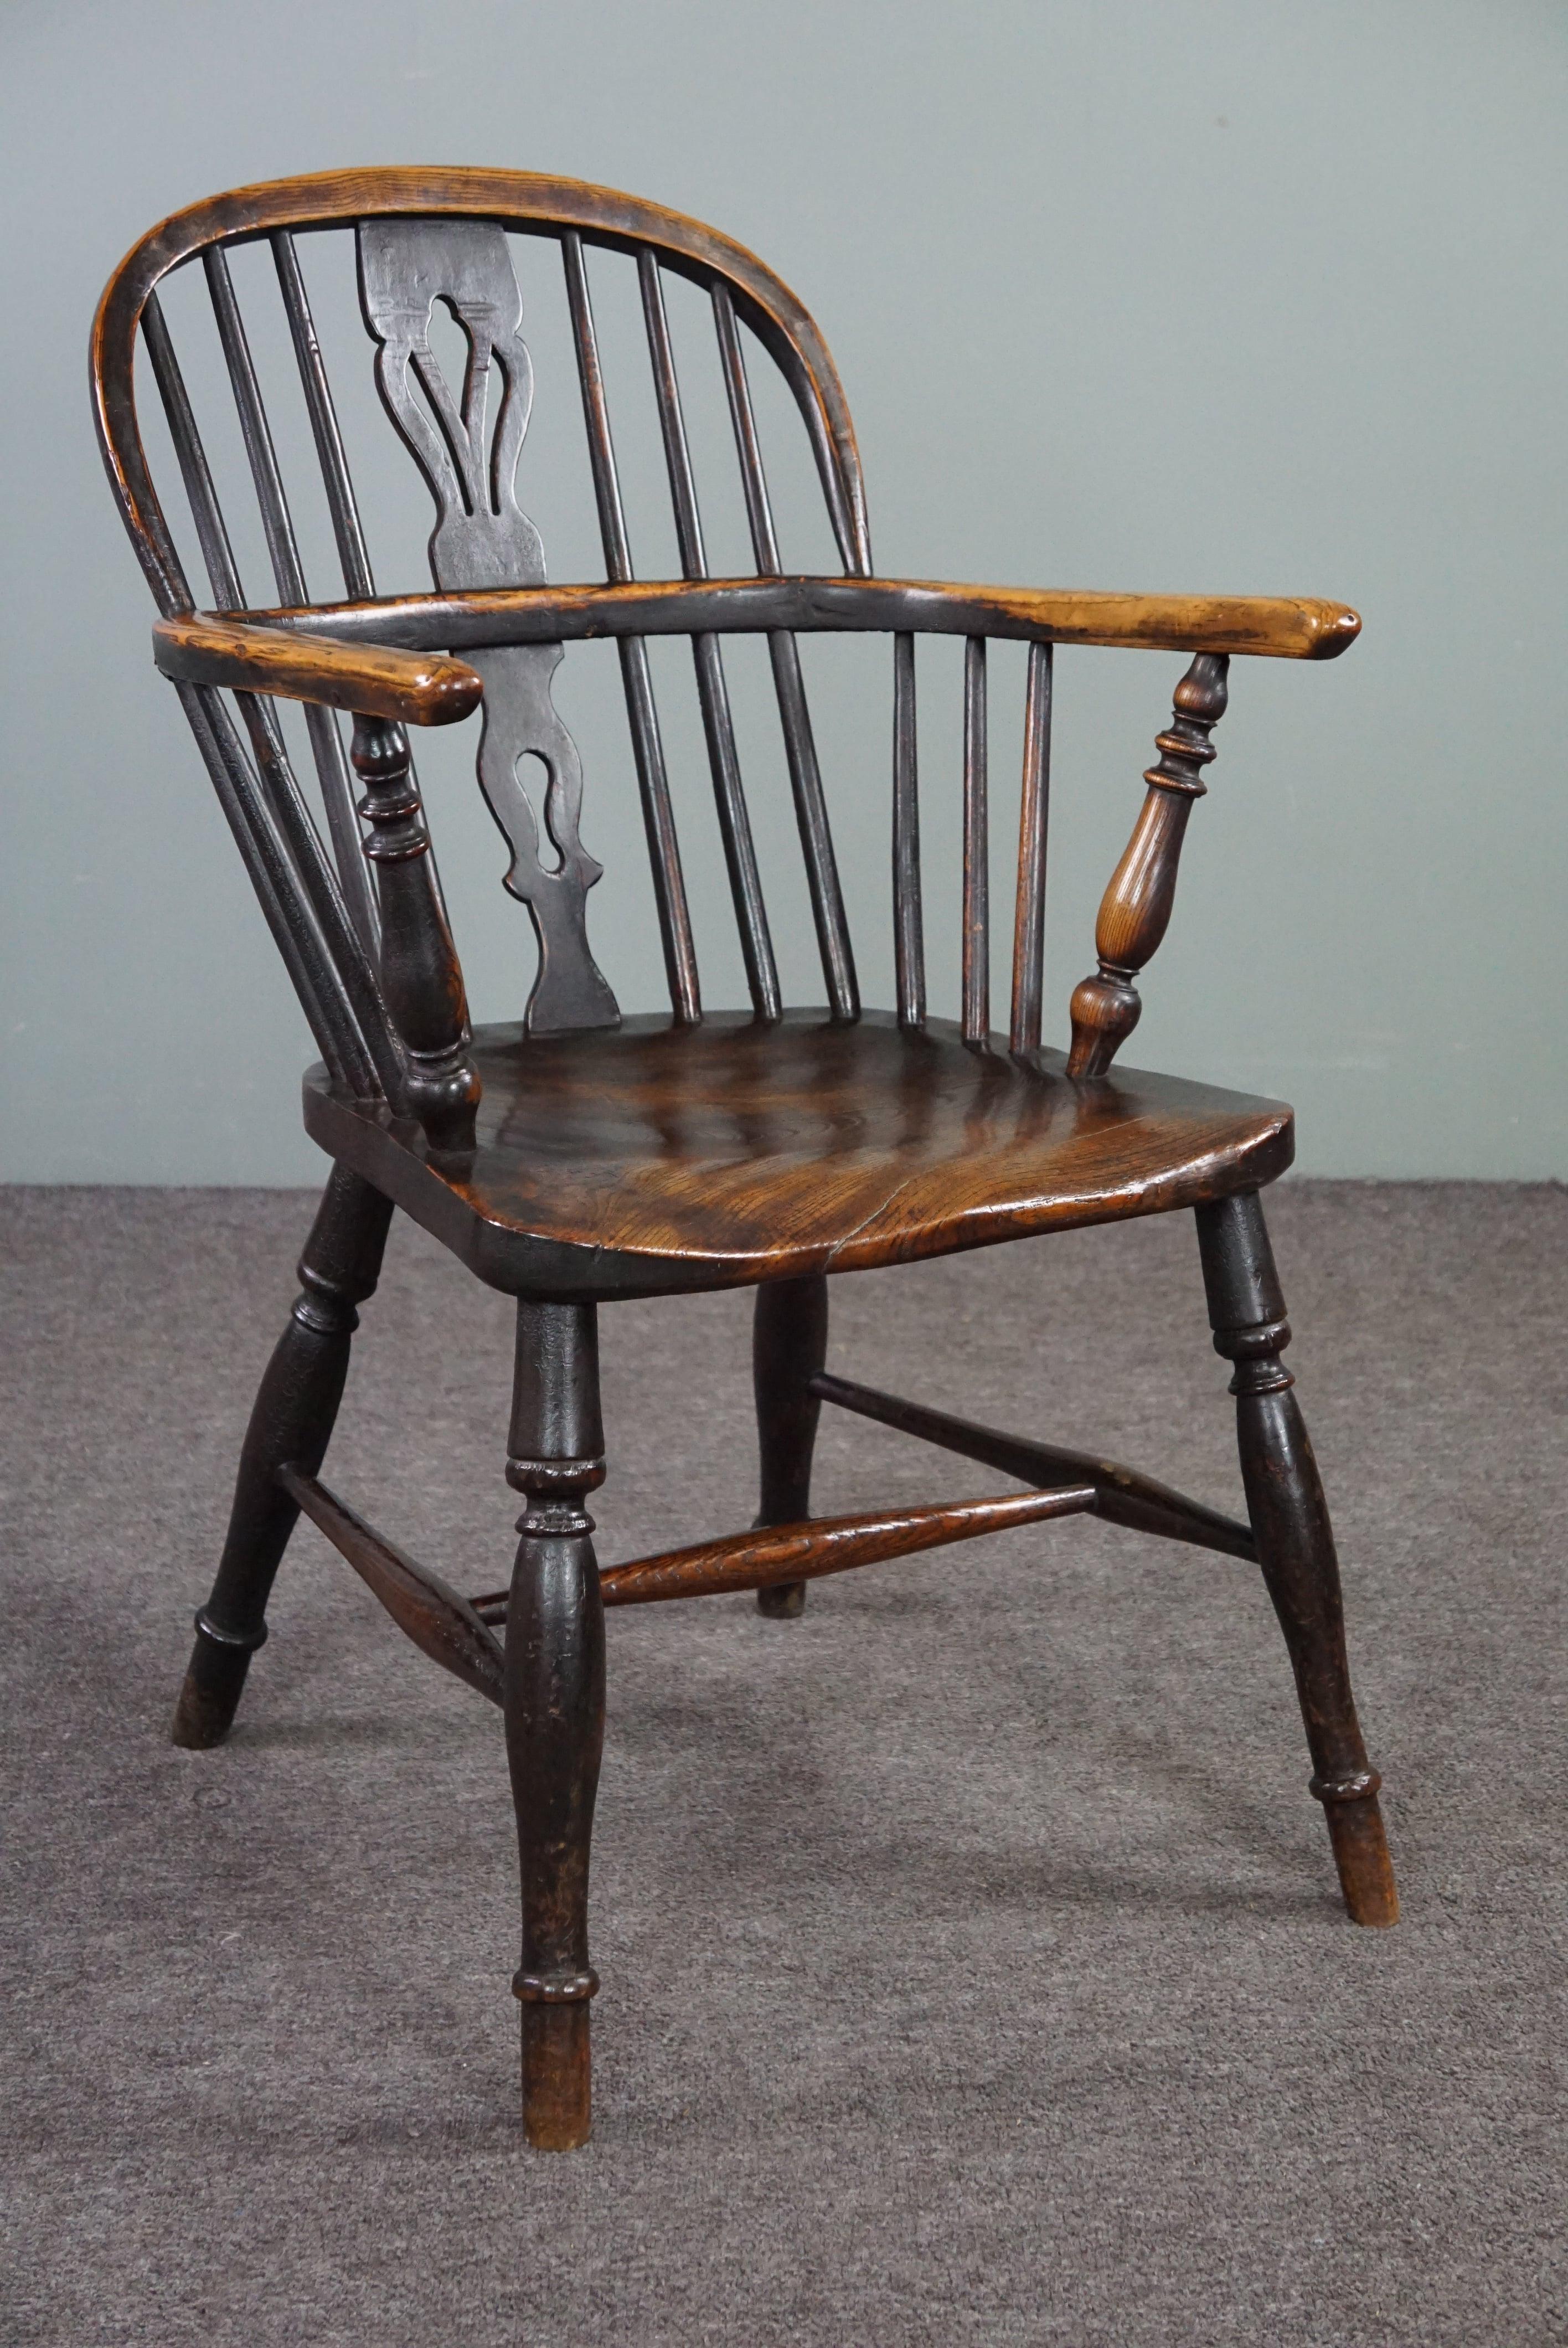 This beautiful antique chair is made of solid wood and has a beautiful patina.

This elegant antique English Windsor chair with a low backrest from the early to mid 18th century has a barred backrest and a beautifully shaped thick solid wood seat